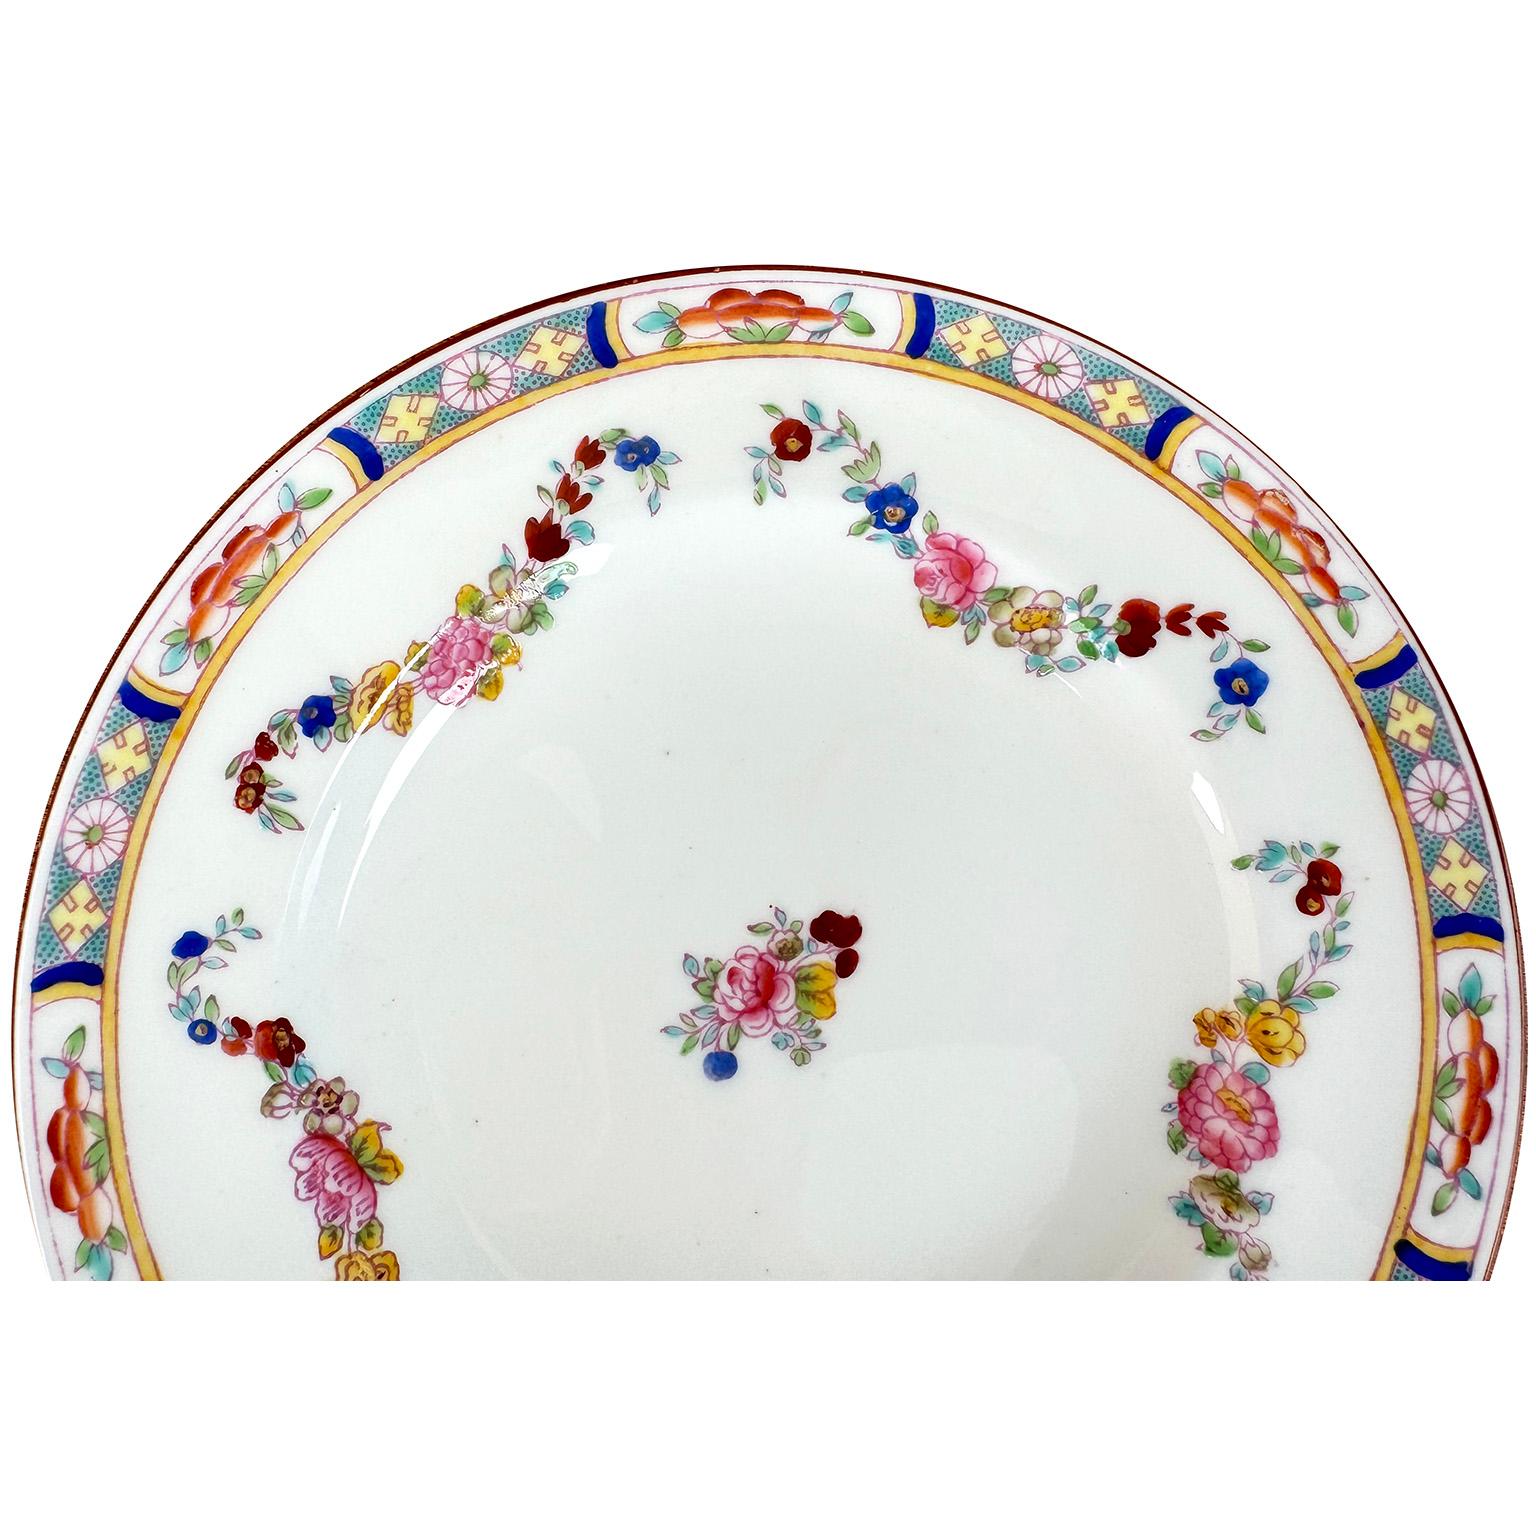 A Set of 36 English Hand-Decorated Minton Fine China Bread Plates. The beautifully vibrant color hand painted bread plates, each with a colorful floral design, an intricate trim and swaged floral strands, centered with a floral bouquet. All bearing